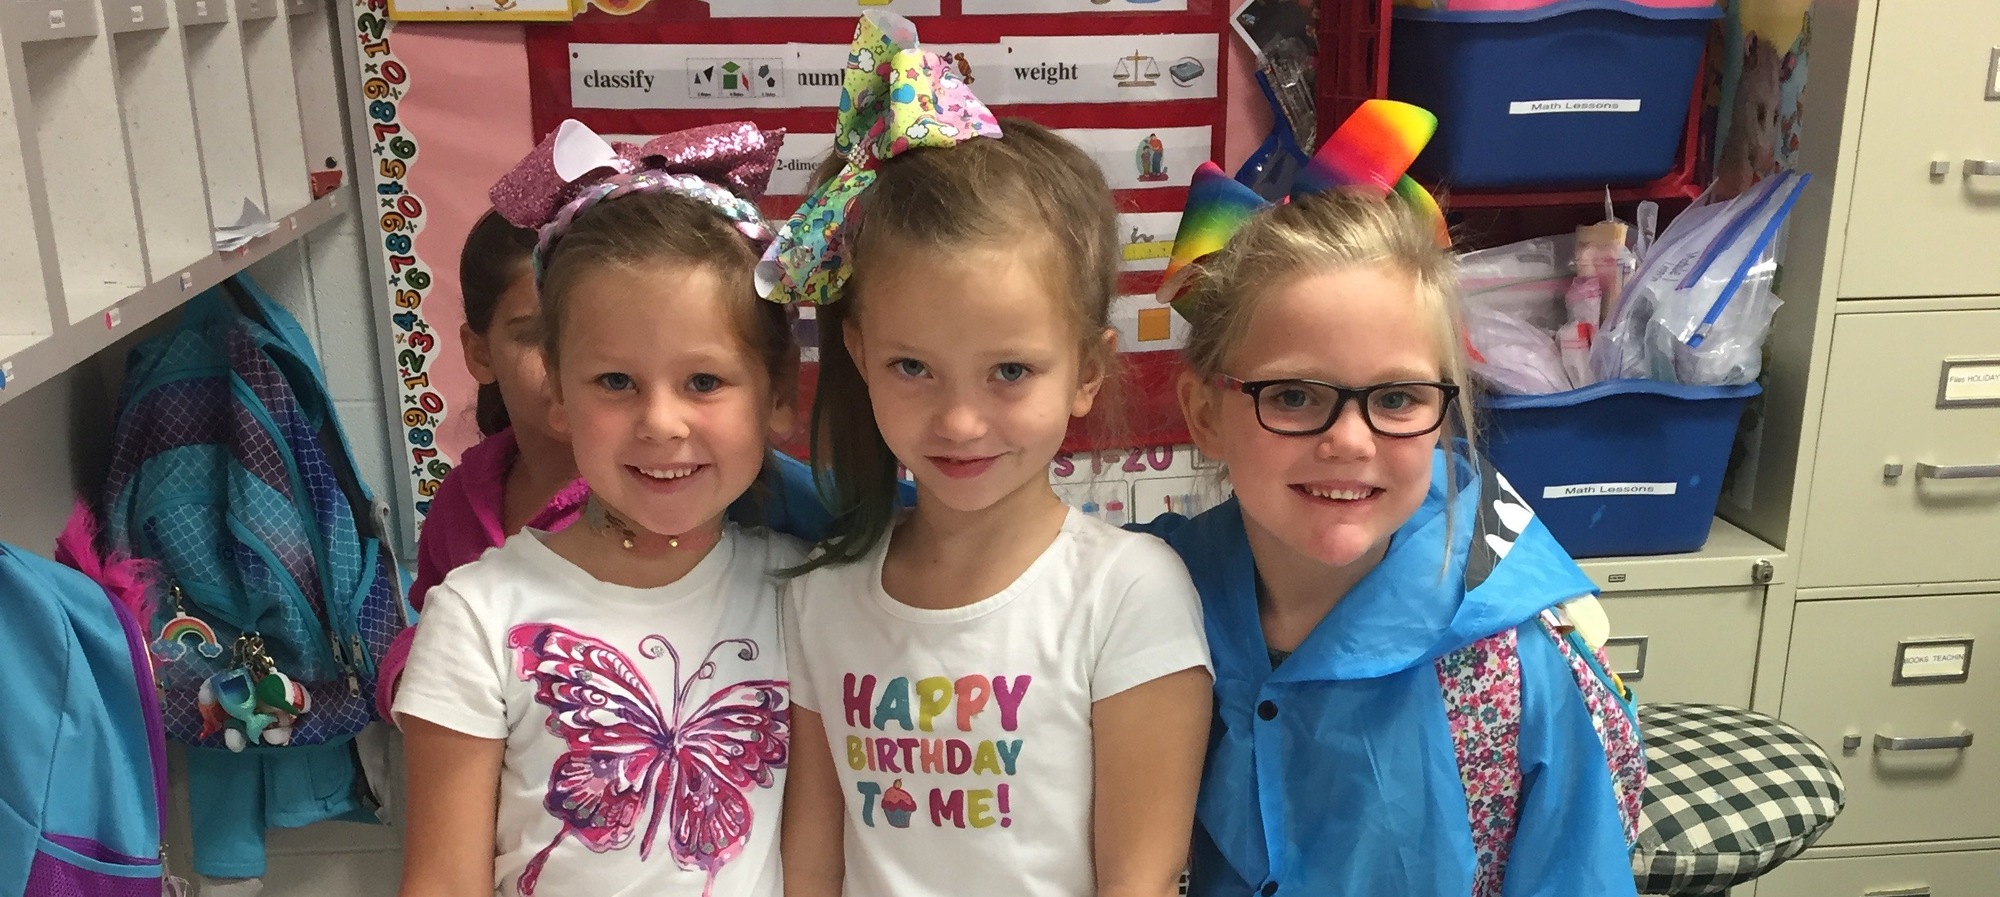 Three girls with bows in their hair.